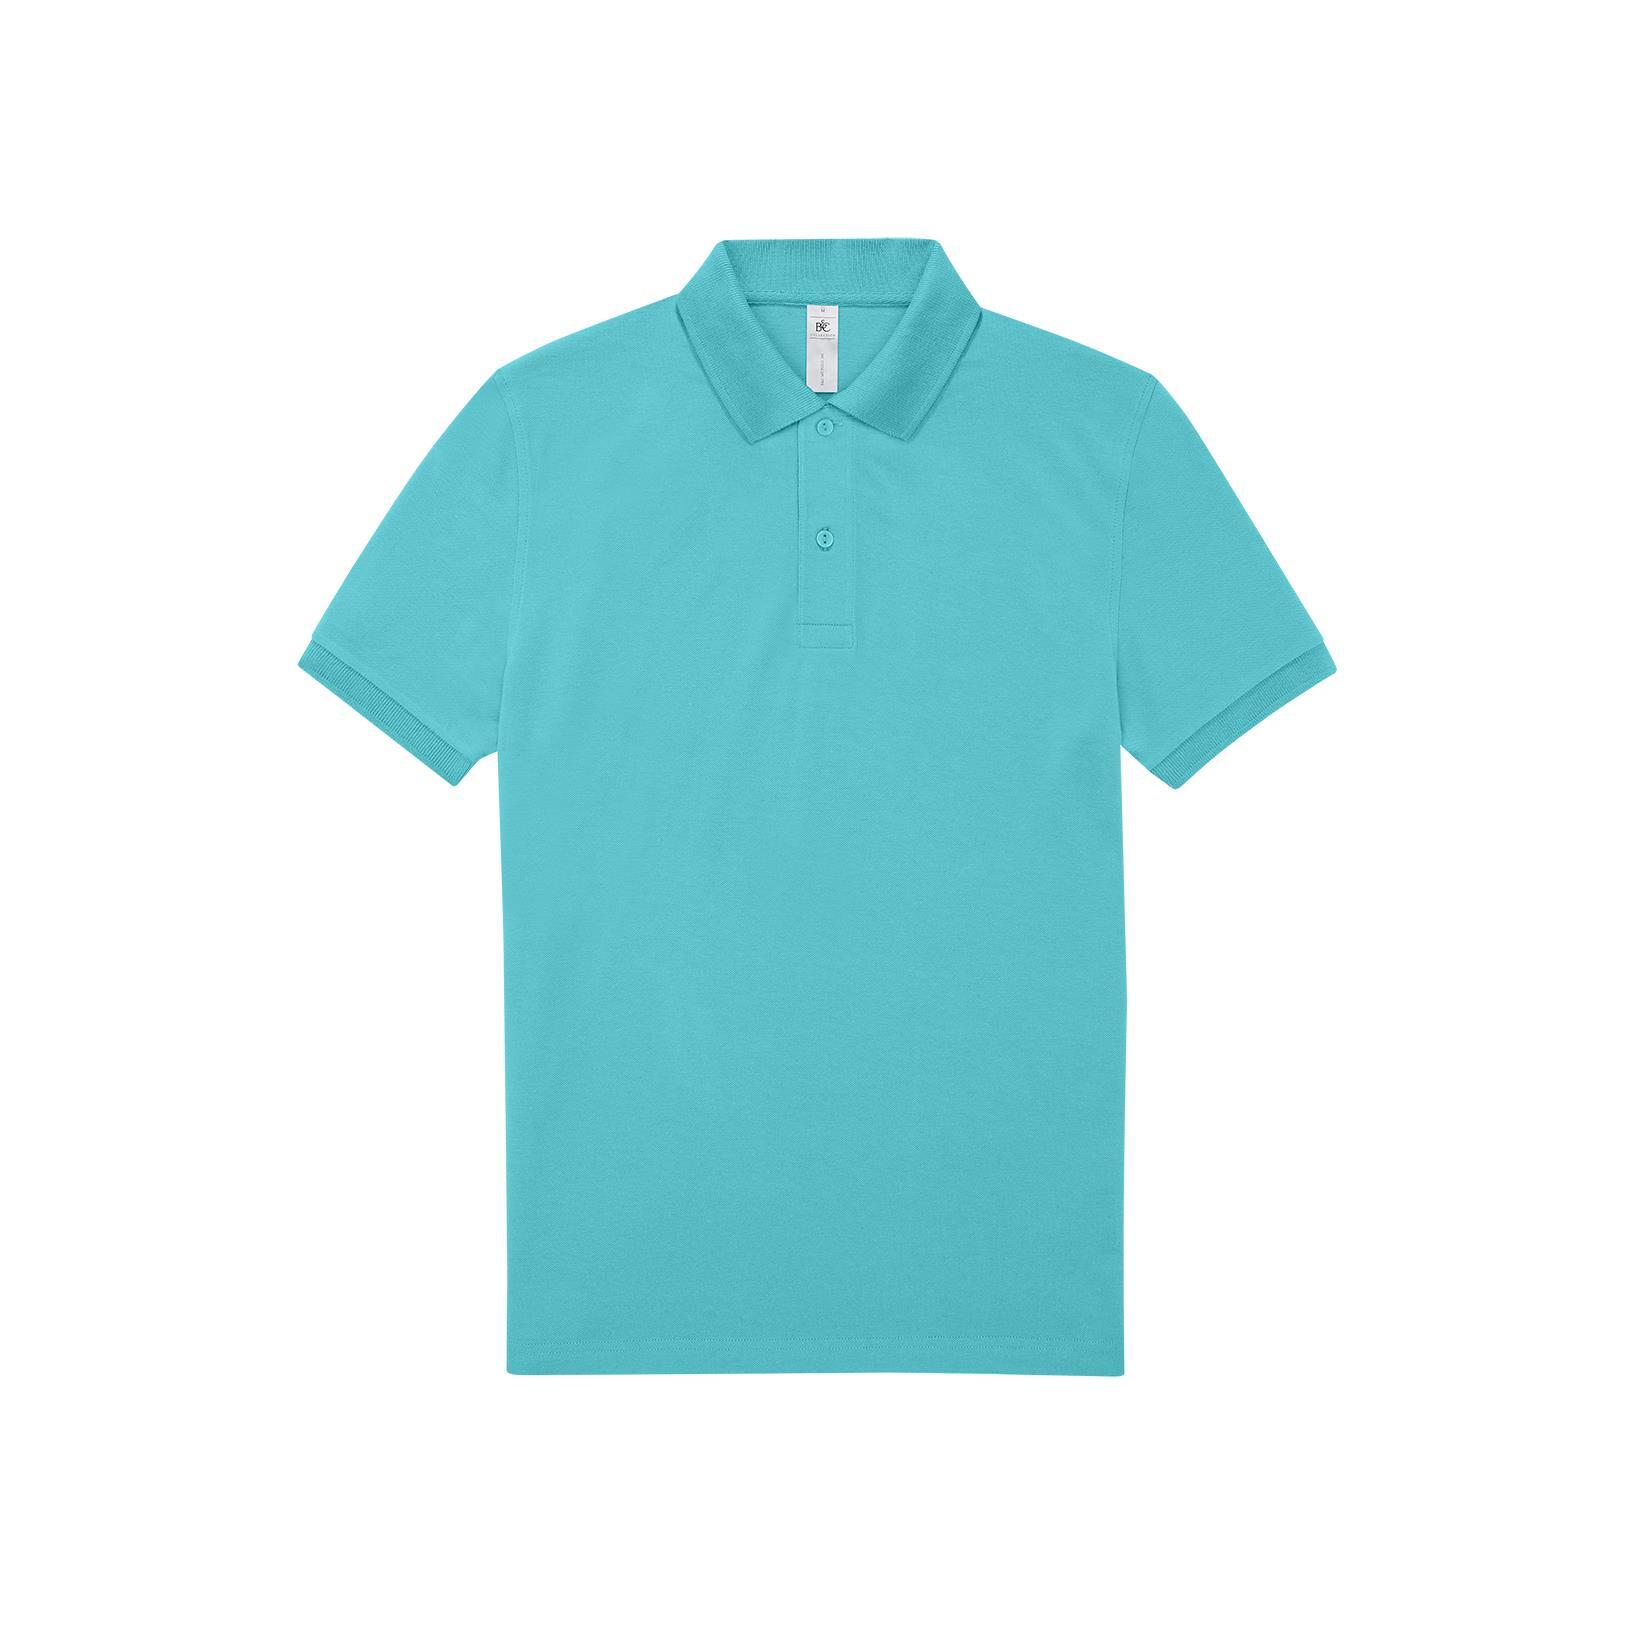 Polo voor mannen meta turquoise moderne polo